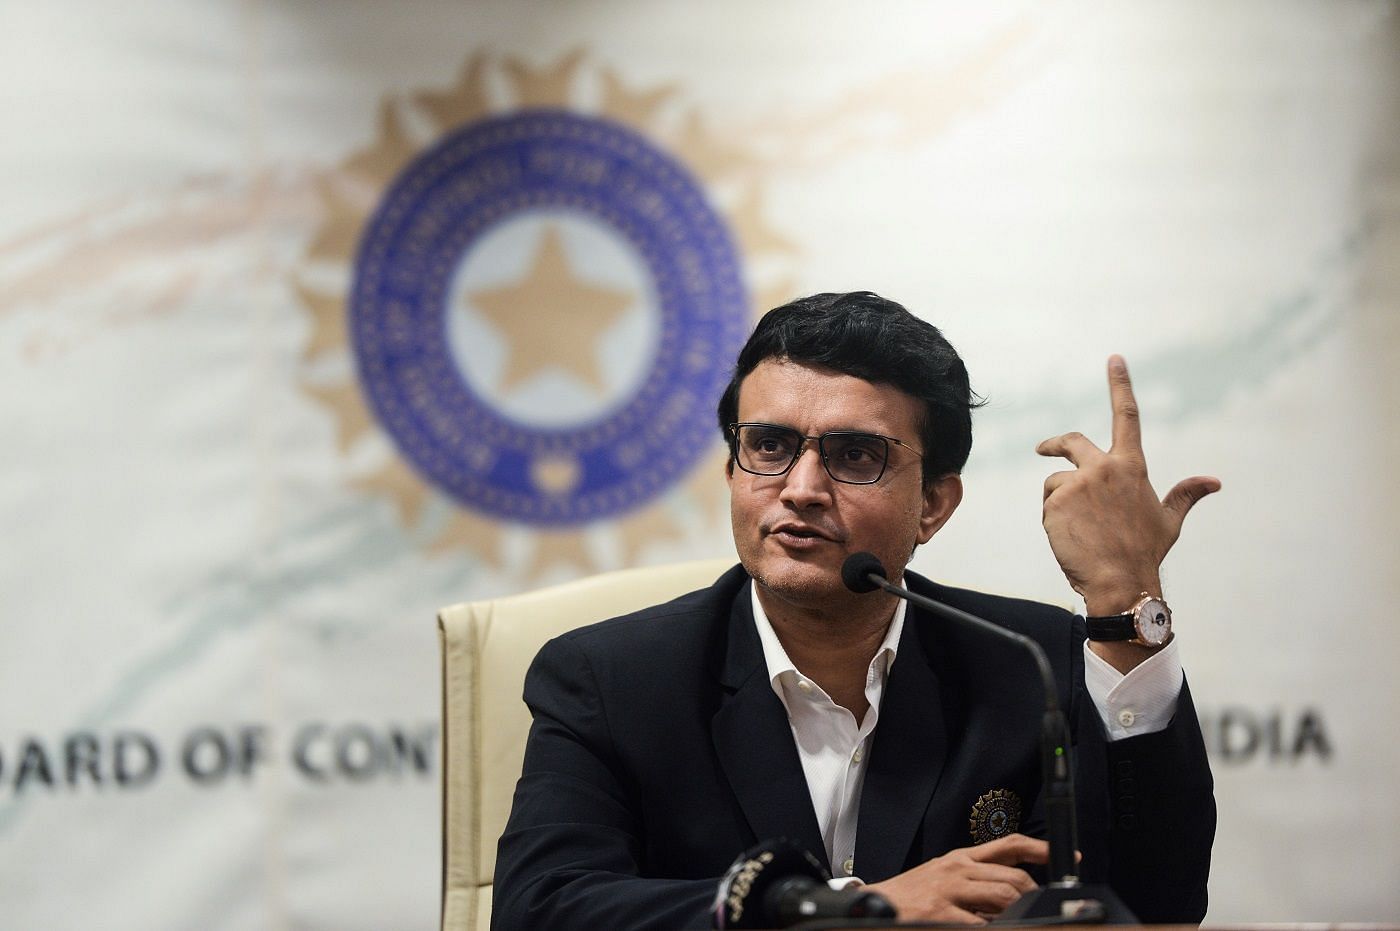 Sourav Ganguly envisions the next season of the IPL being played in a home-and-away format